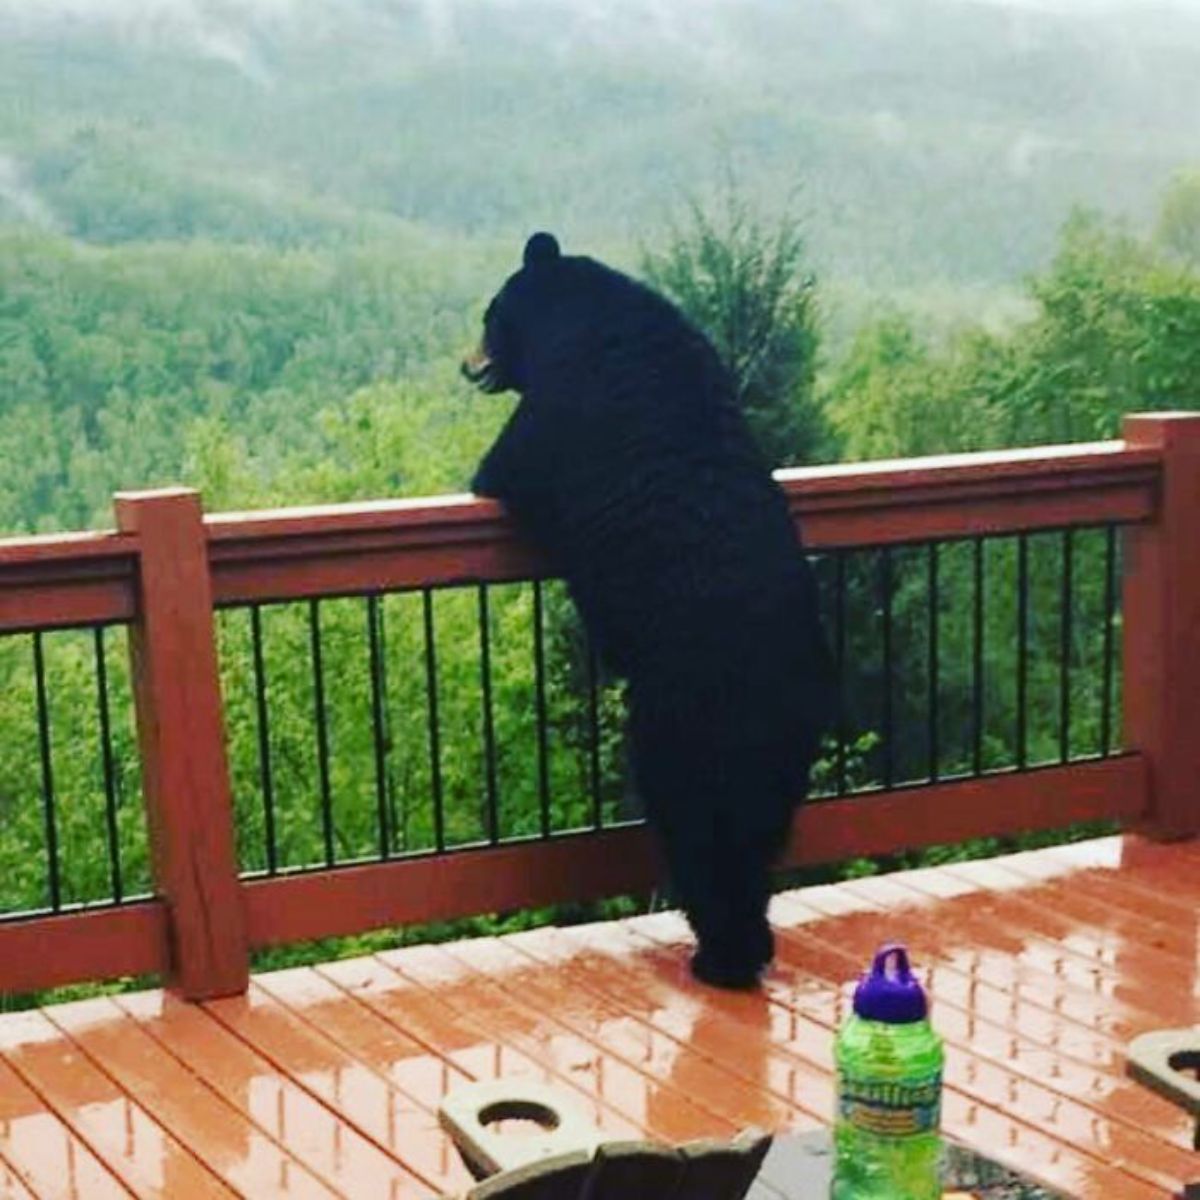 black bear standing on hind legs and leaning against a brown railing looking over the trees